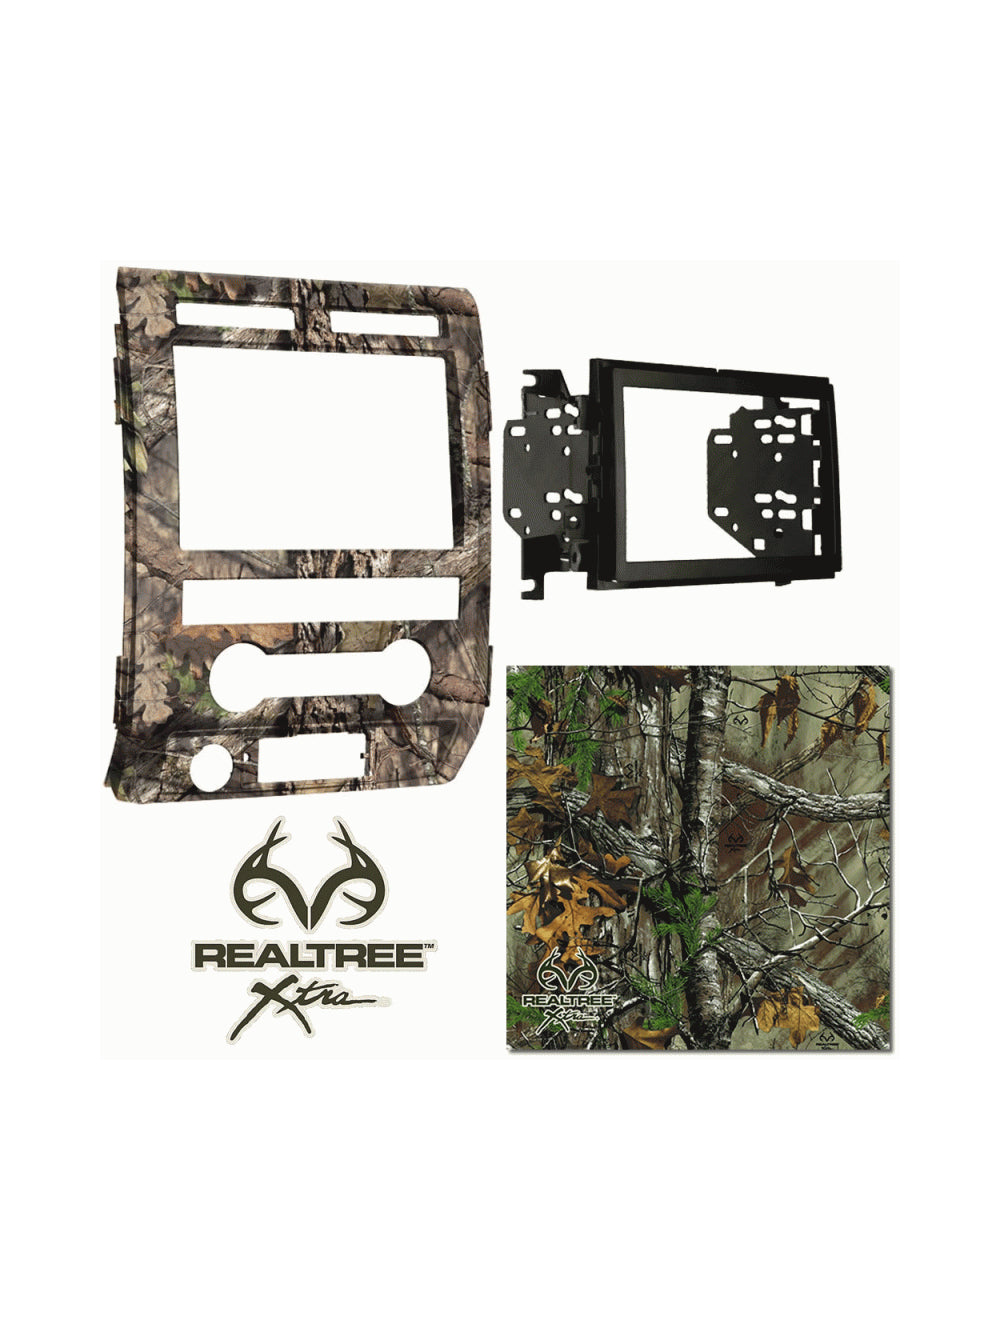 Metra RTX-95-5822 Double DIN Dash Kit for Ford F-150 2009-2010 Realtree Xtra